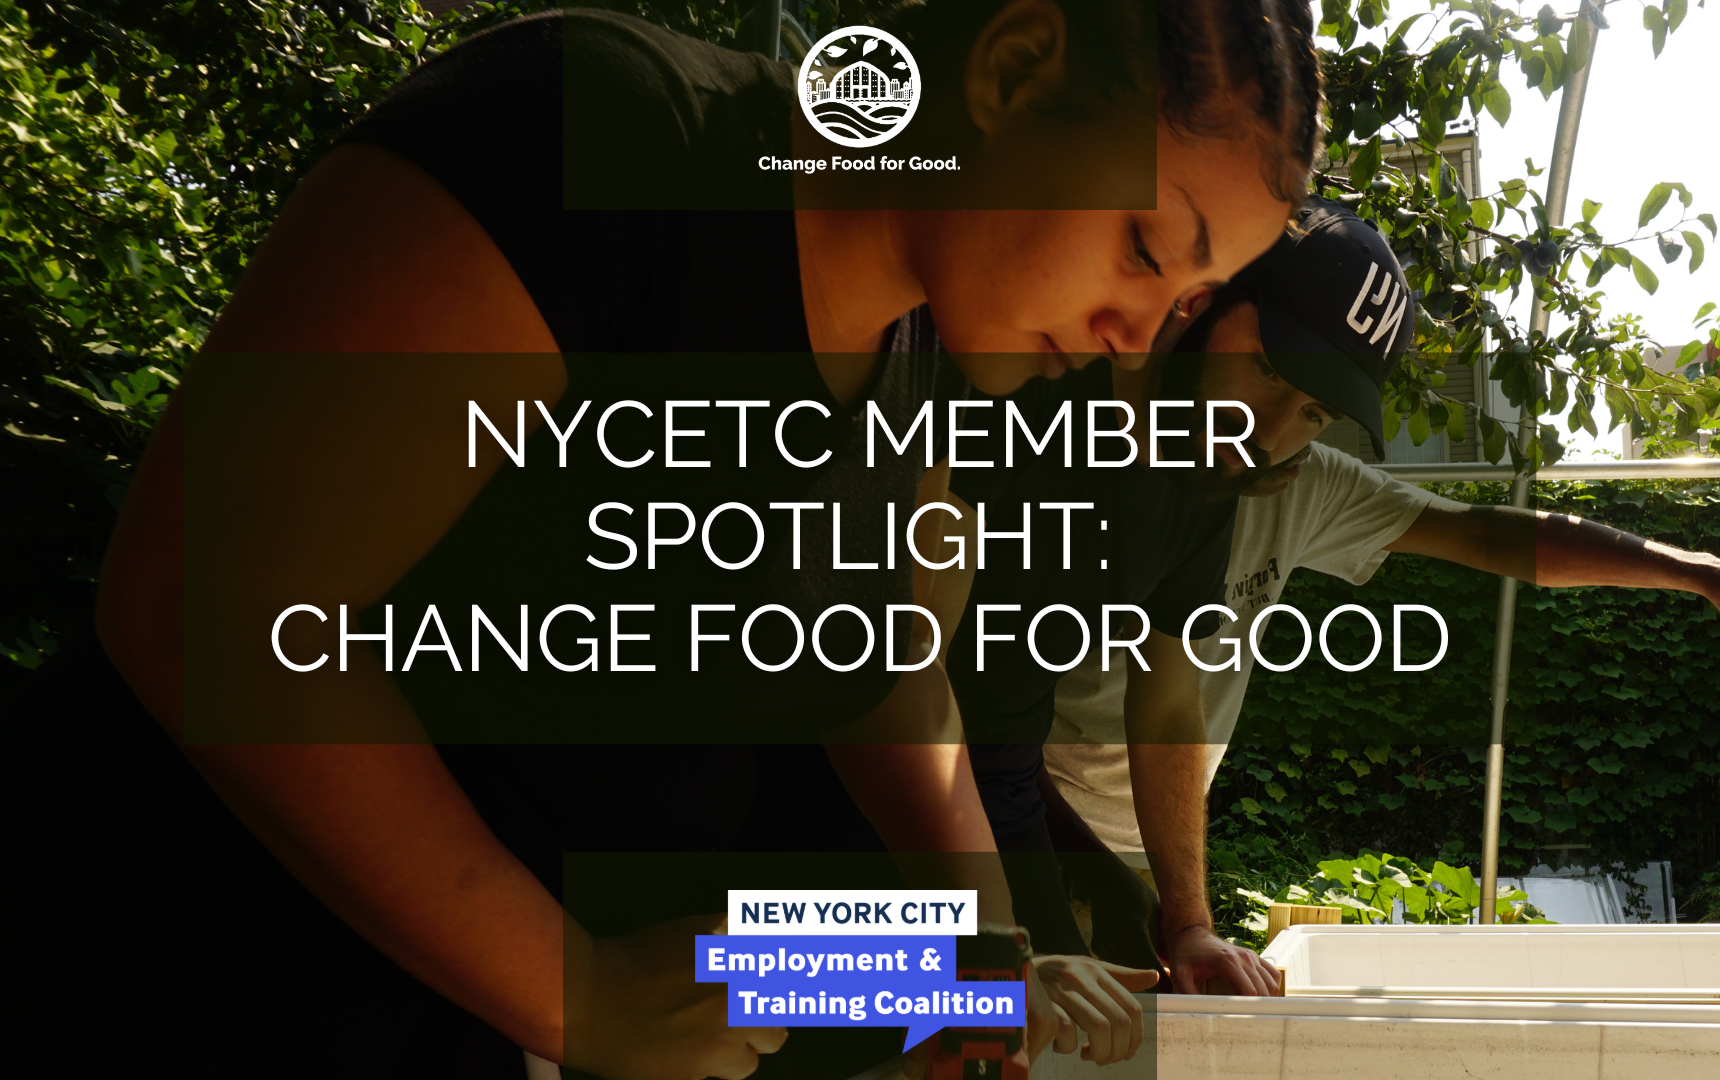 NYCETC Members Spotlight: Change Food for Good